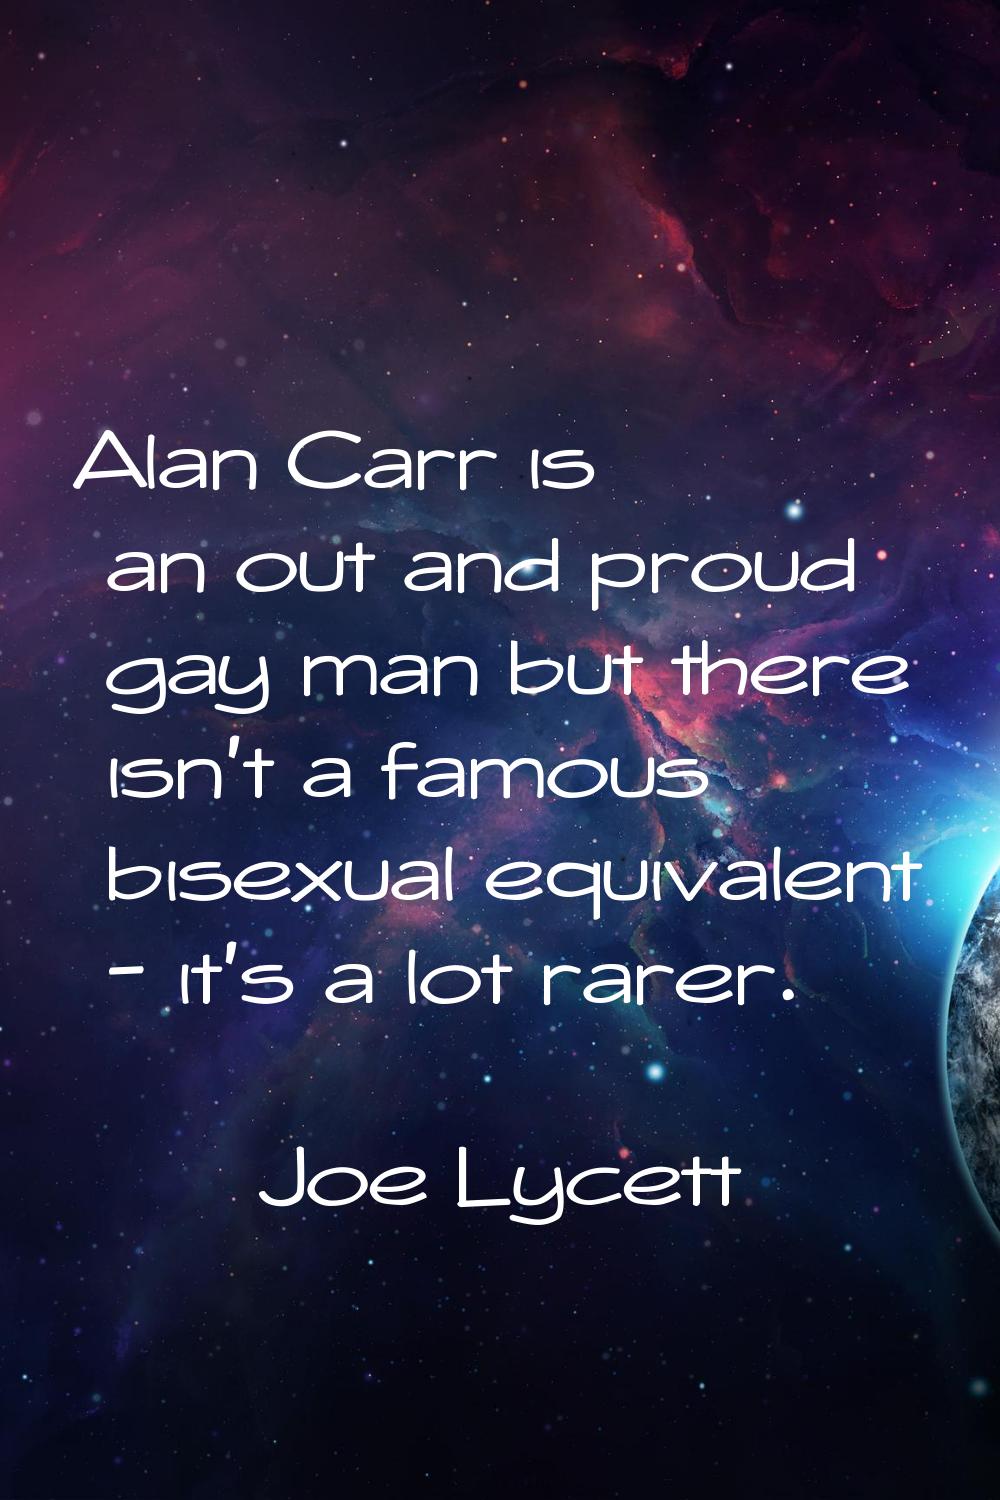 Alan Carr is an out and proud gay man but there isn't a famous bisexual equivalent - it's a lot rar